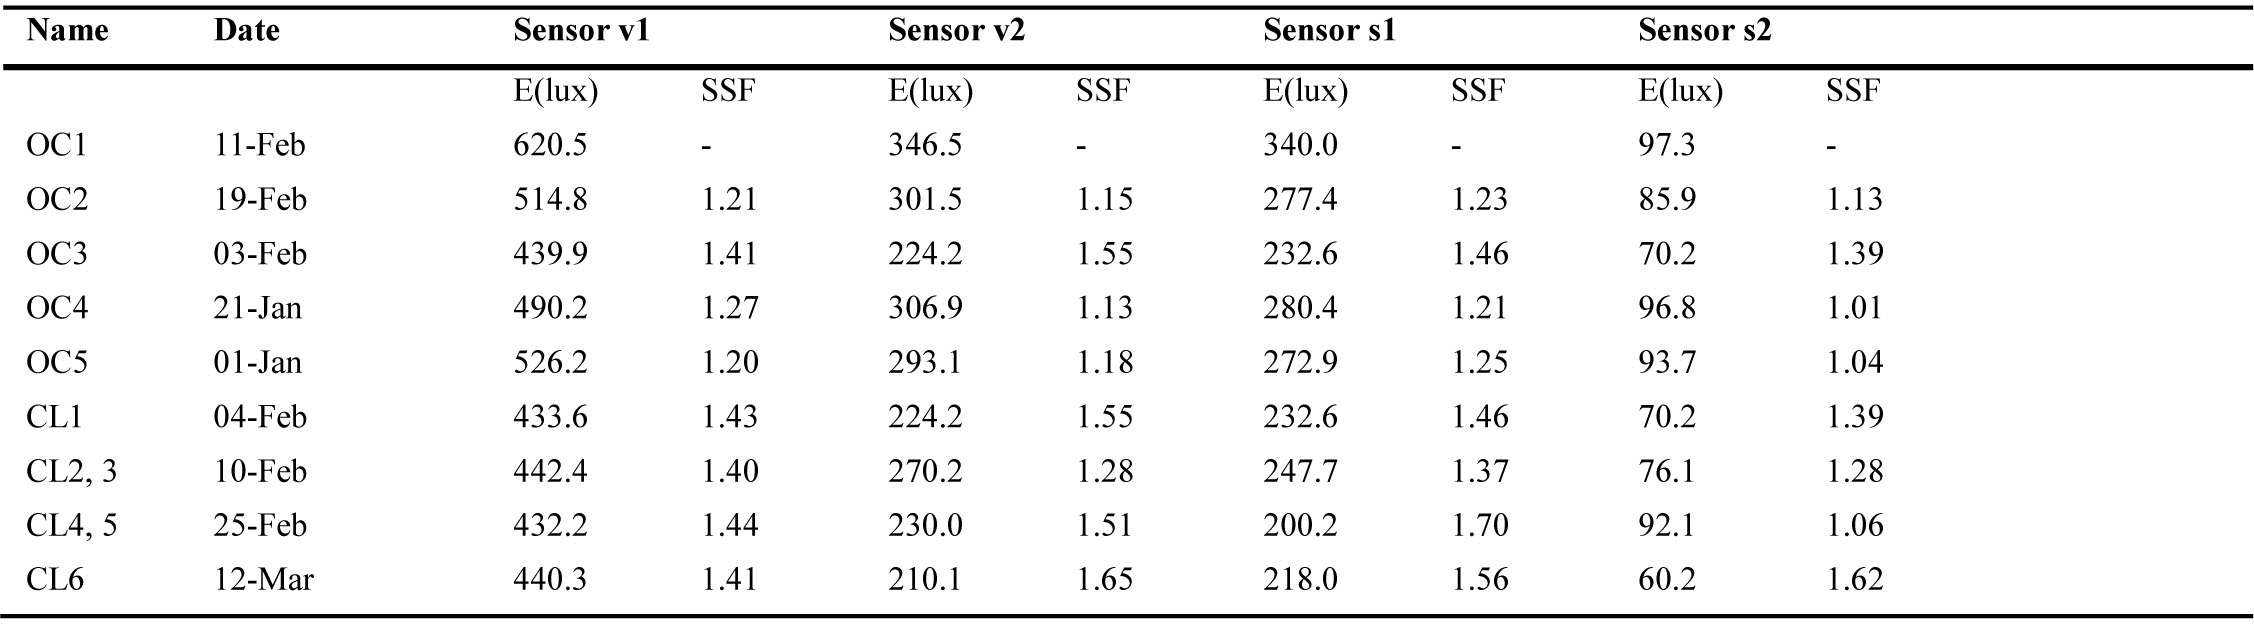 SSF of the illuminance sensors for each considered time.